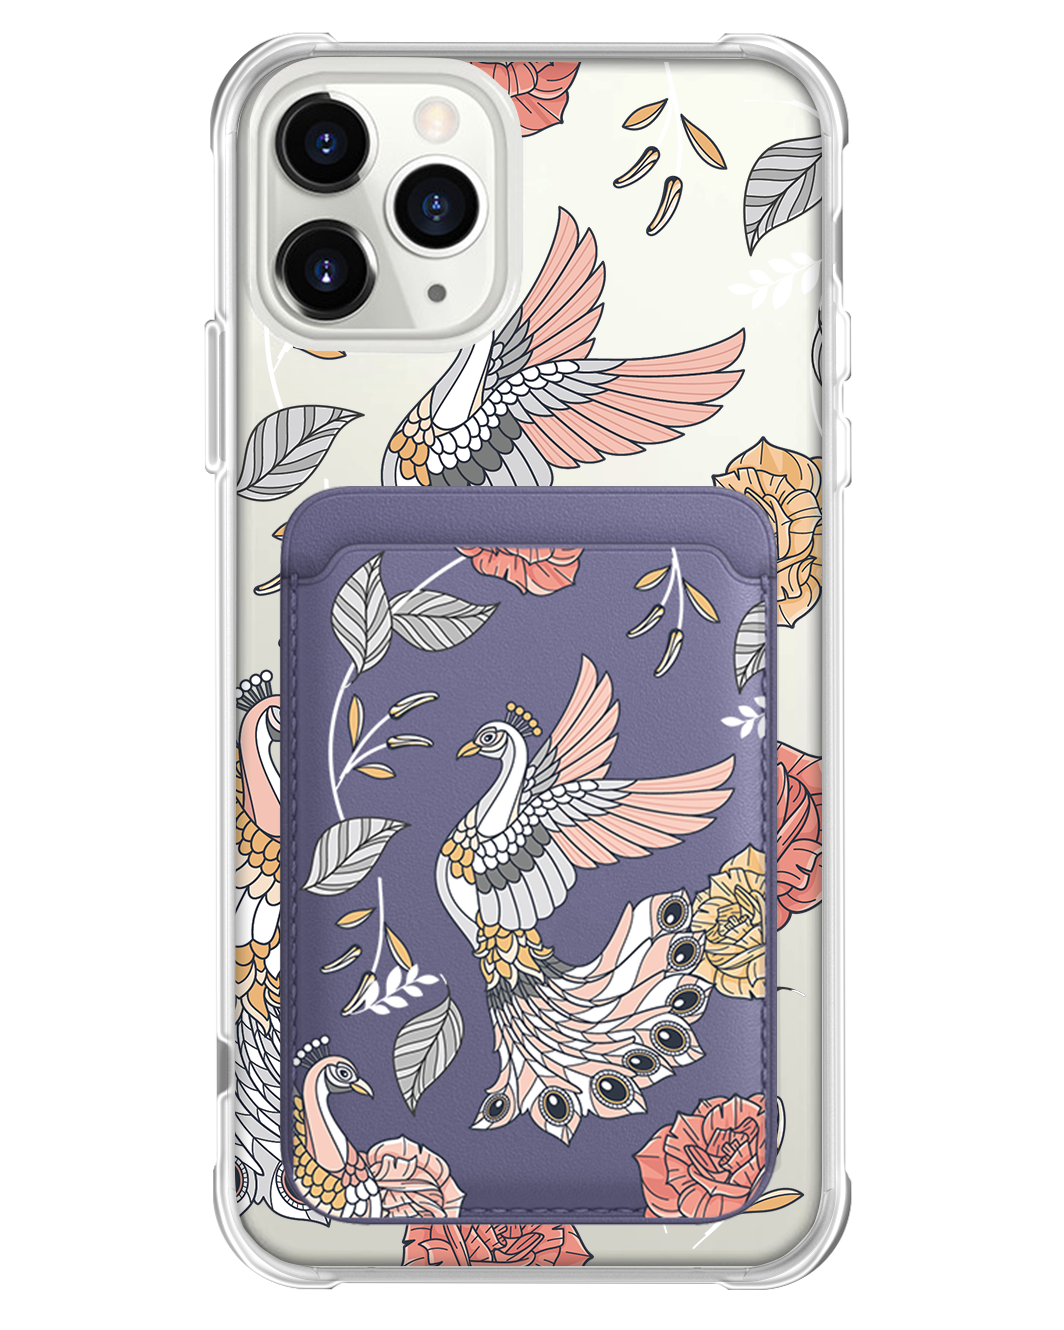 iPhone Magnetic Wallet Case - Bird of Paradise 1.0